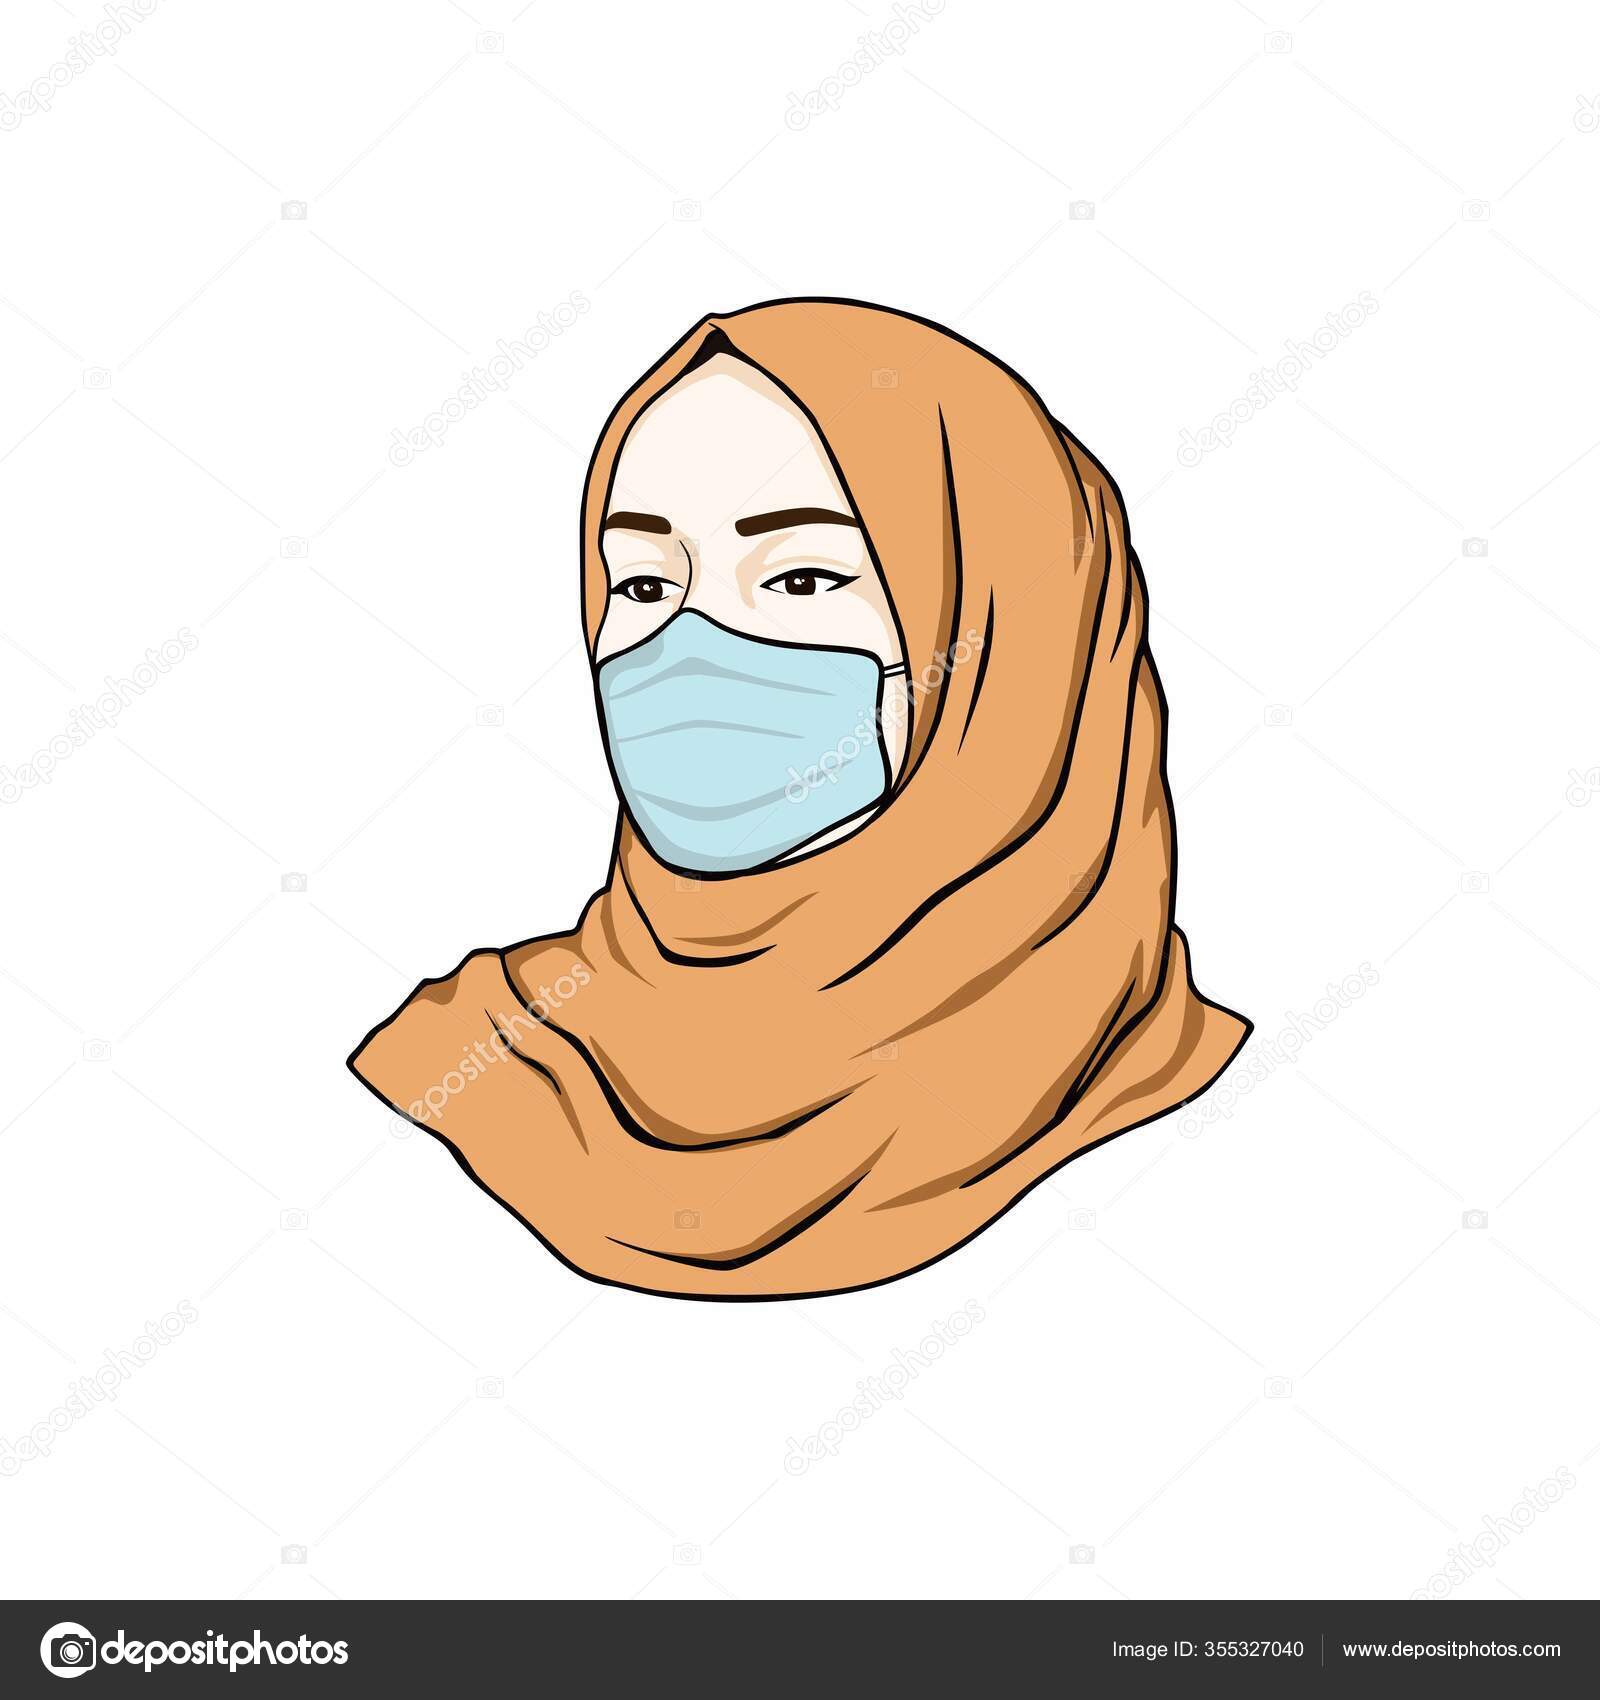 3 829 Doctor Wearing Mask Vector Images Free Royalty Free Doctor Wearing Mask Vectors Depositphotos